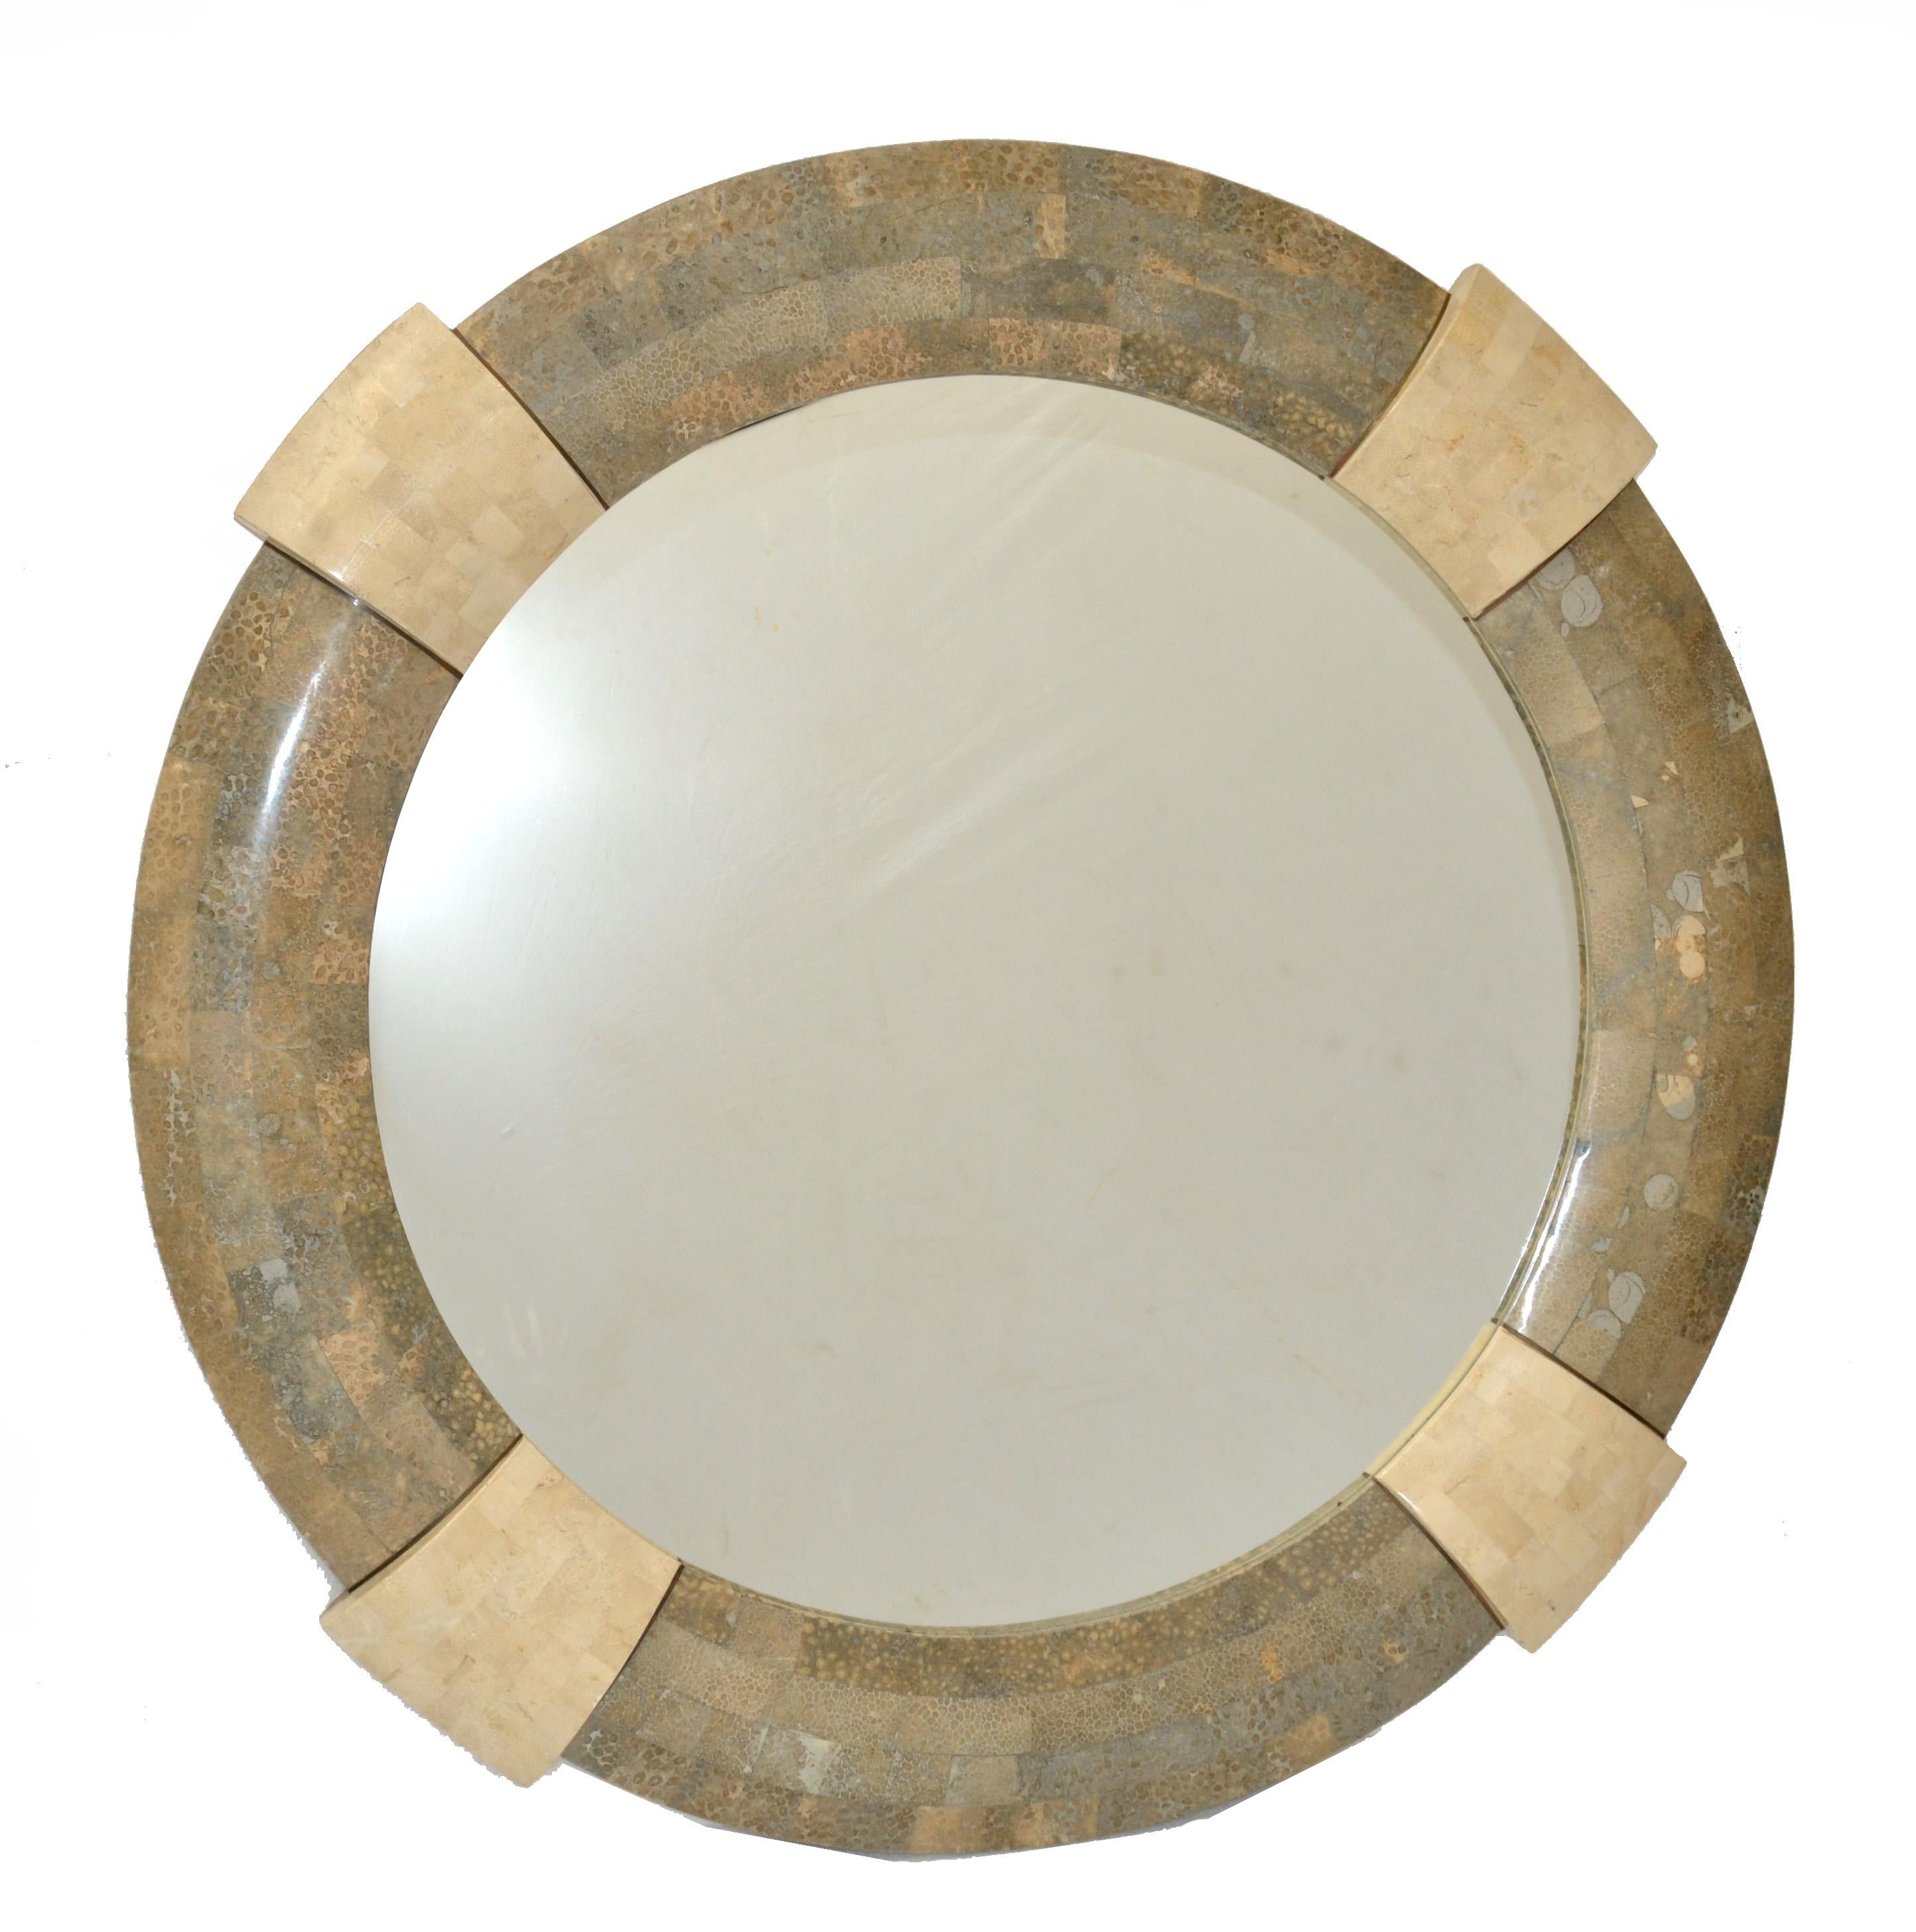 Designed by Robert Marcius for Maitland-Smith Round Tessellated Wall Mirror 1980 For Sale 5